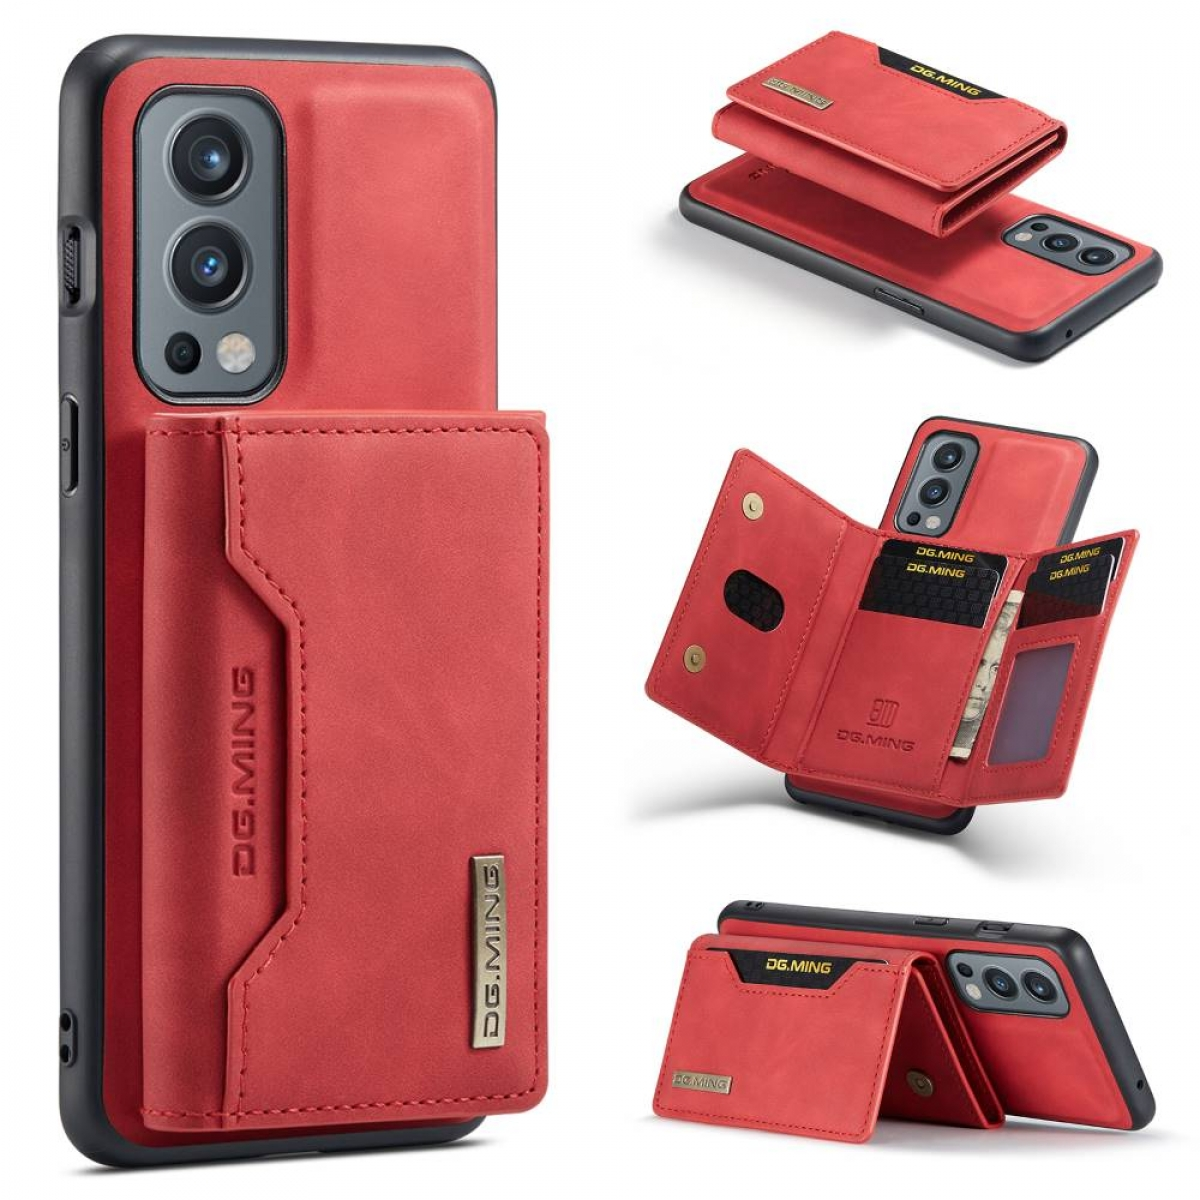 5G, Backcover, 2in1, Rot Nord M2 OnePlus, 2 MING DG